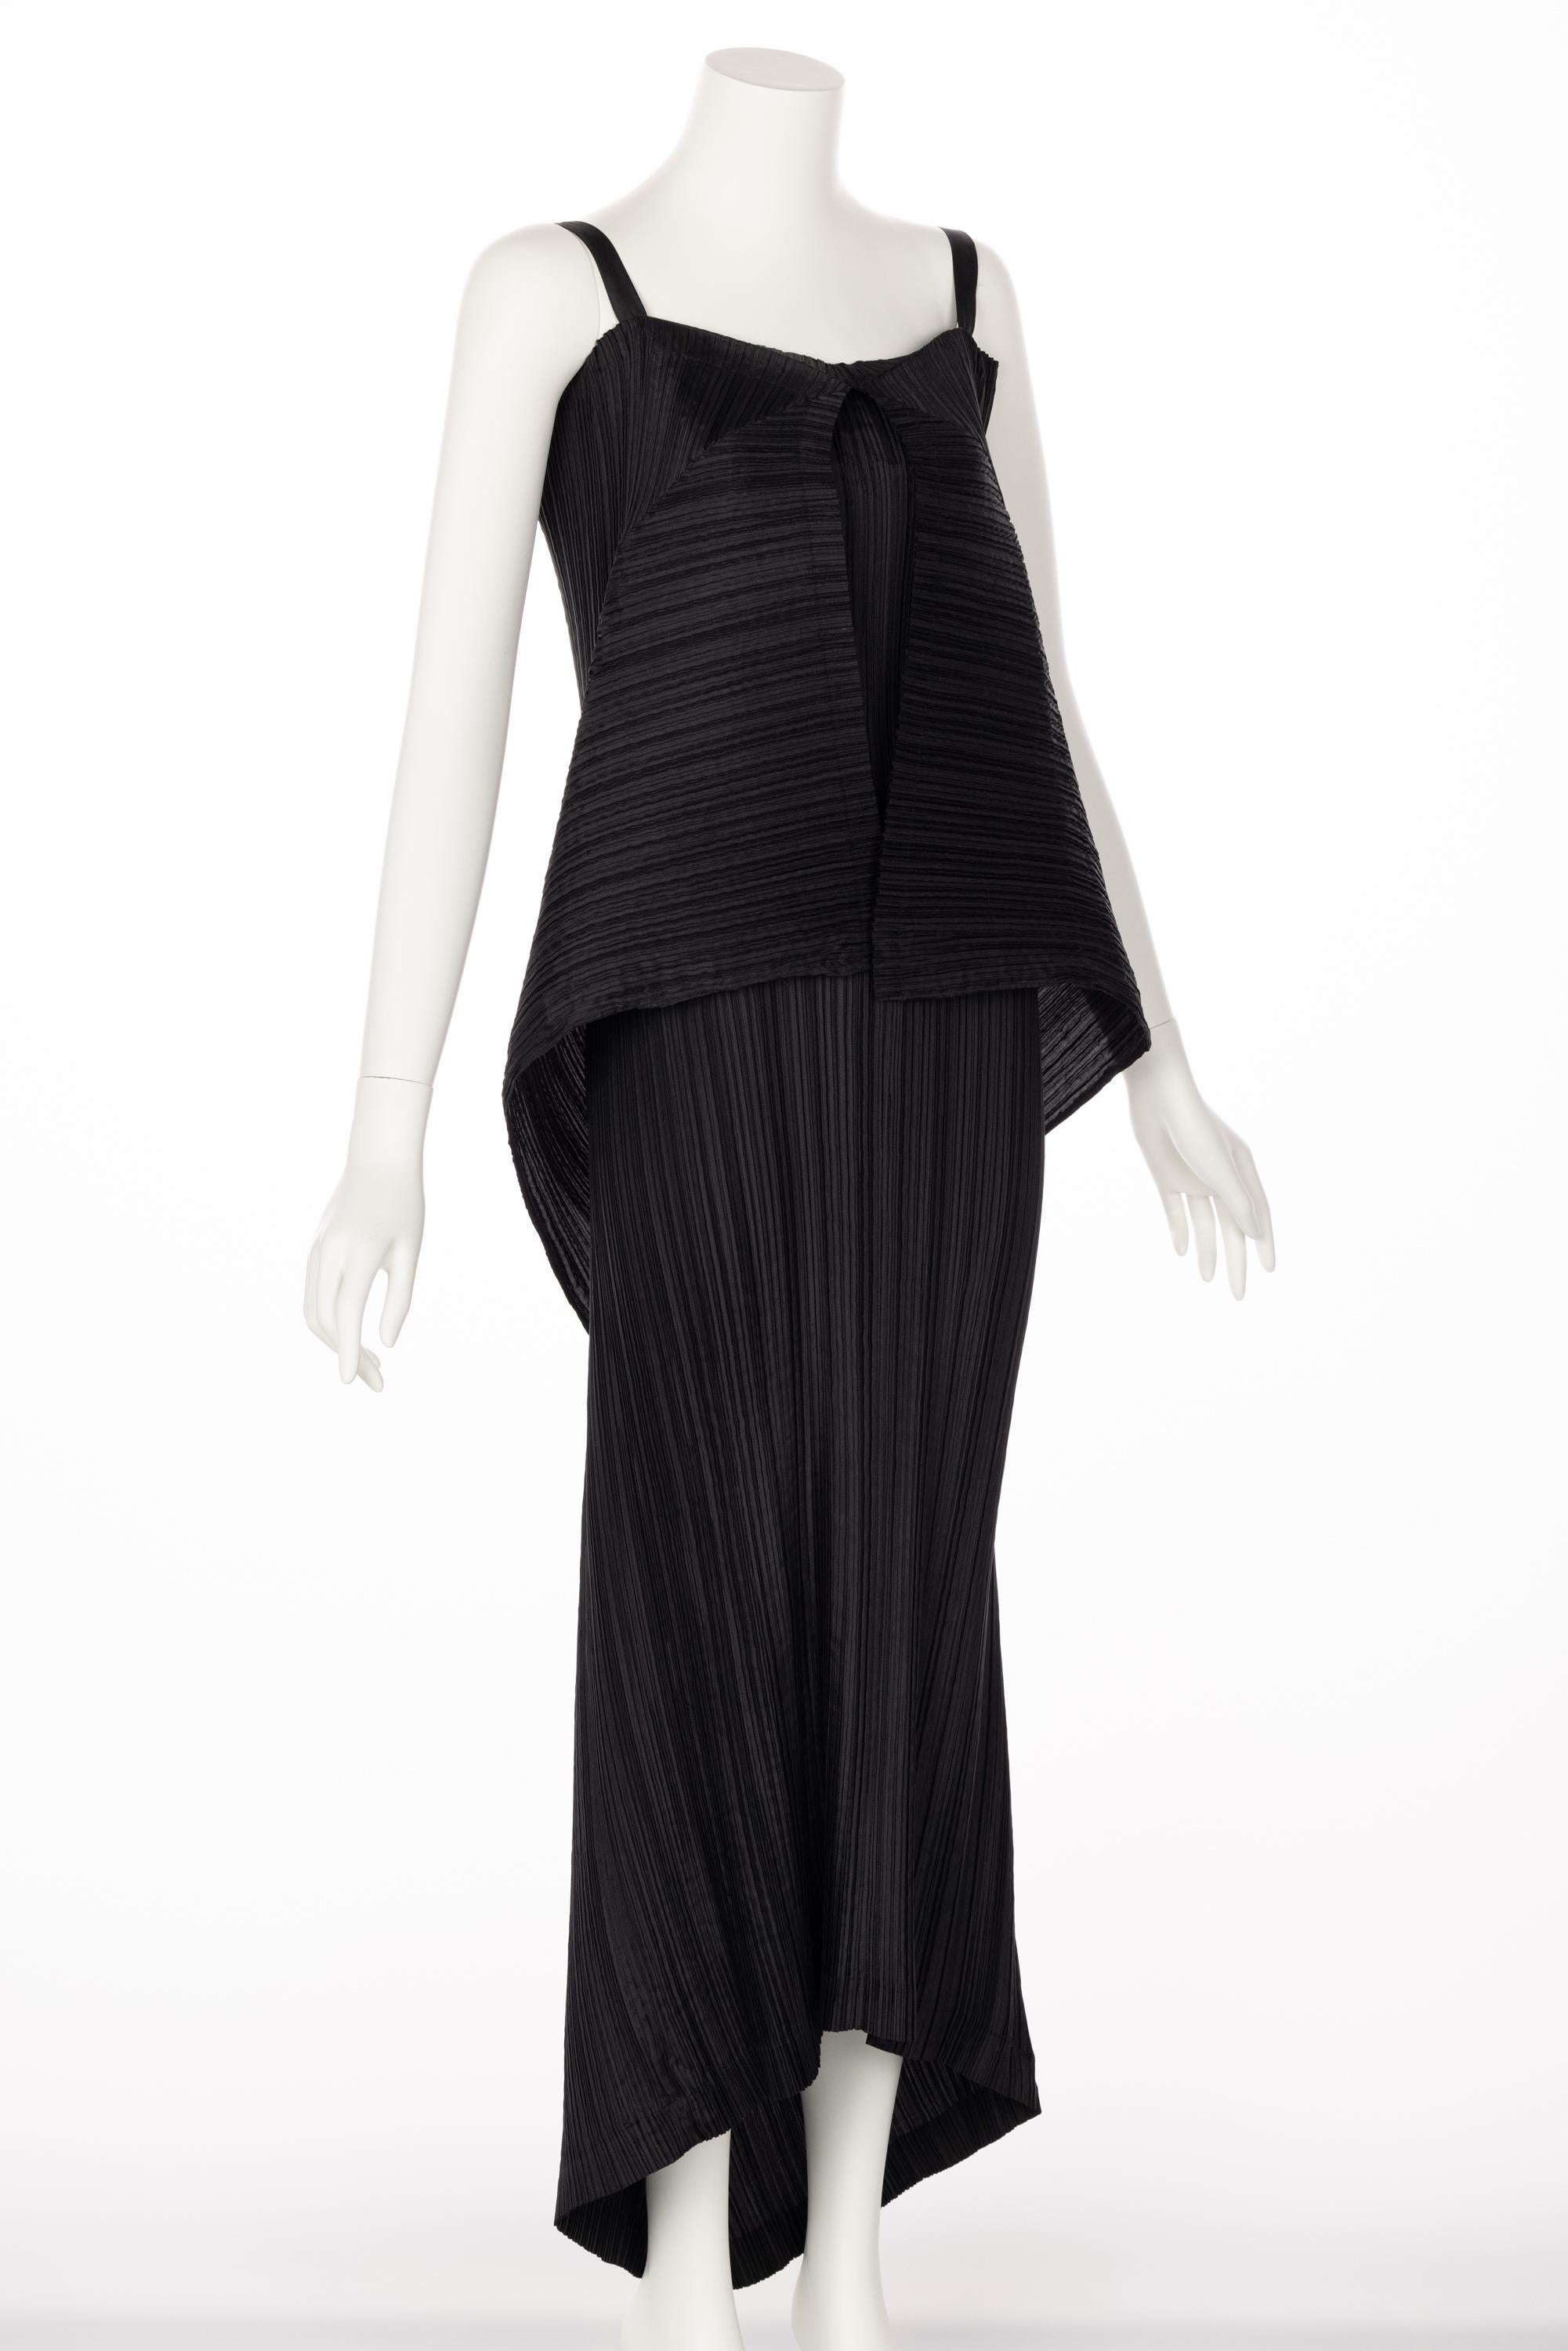 Women's Issey Miyake Black Pleated Sculptural Sleeveless Maxi Dress, 1990s For Sale